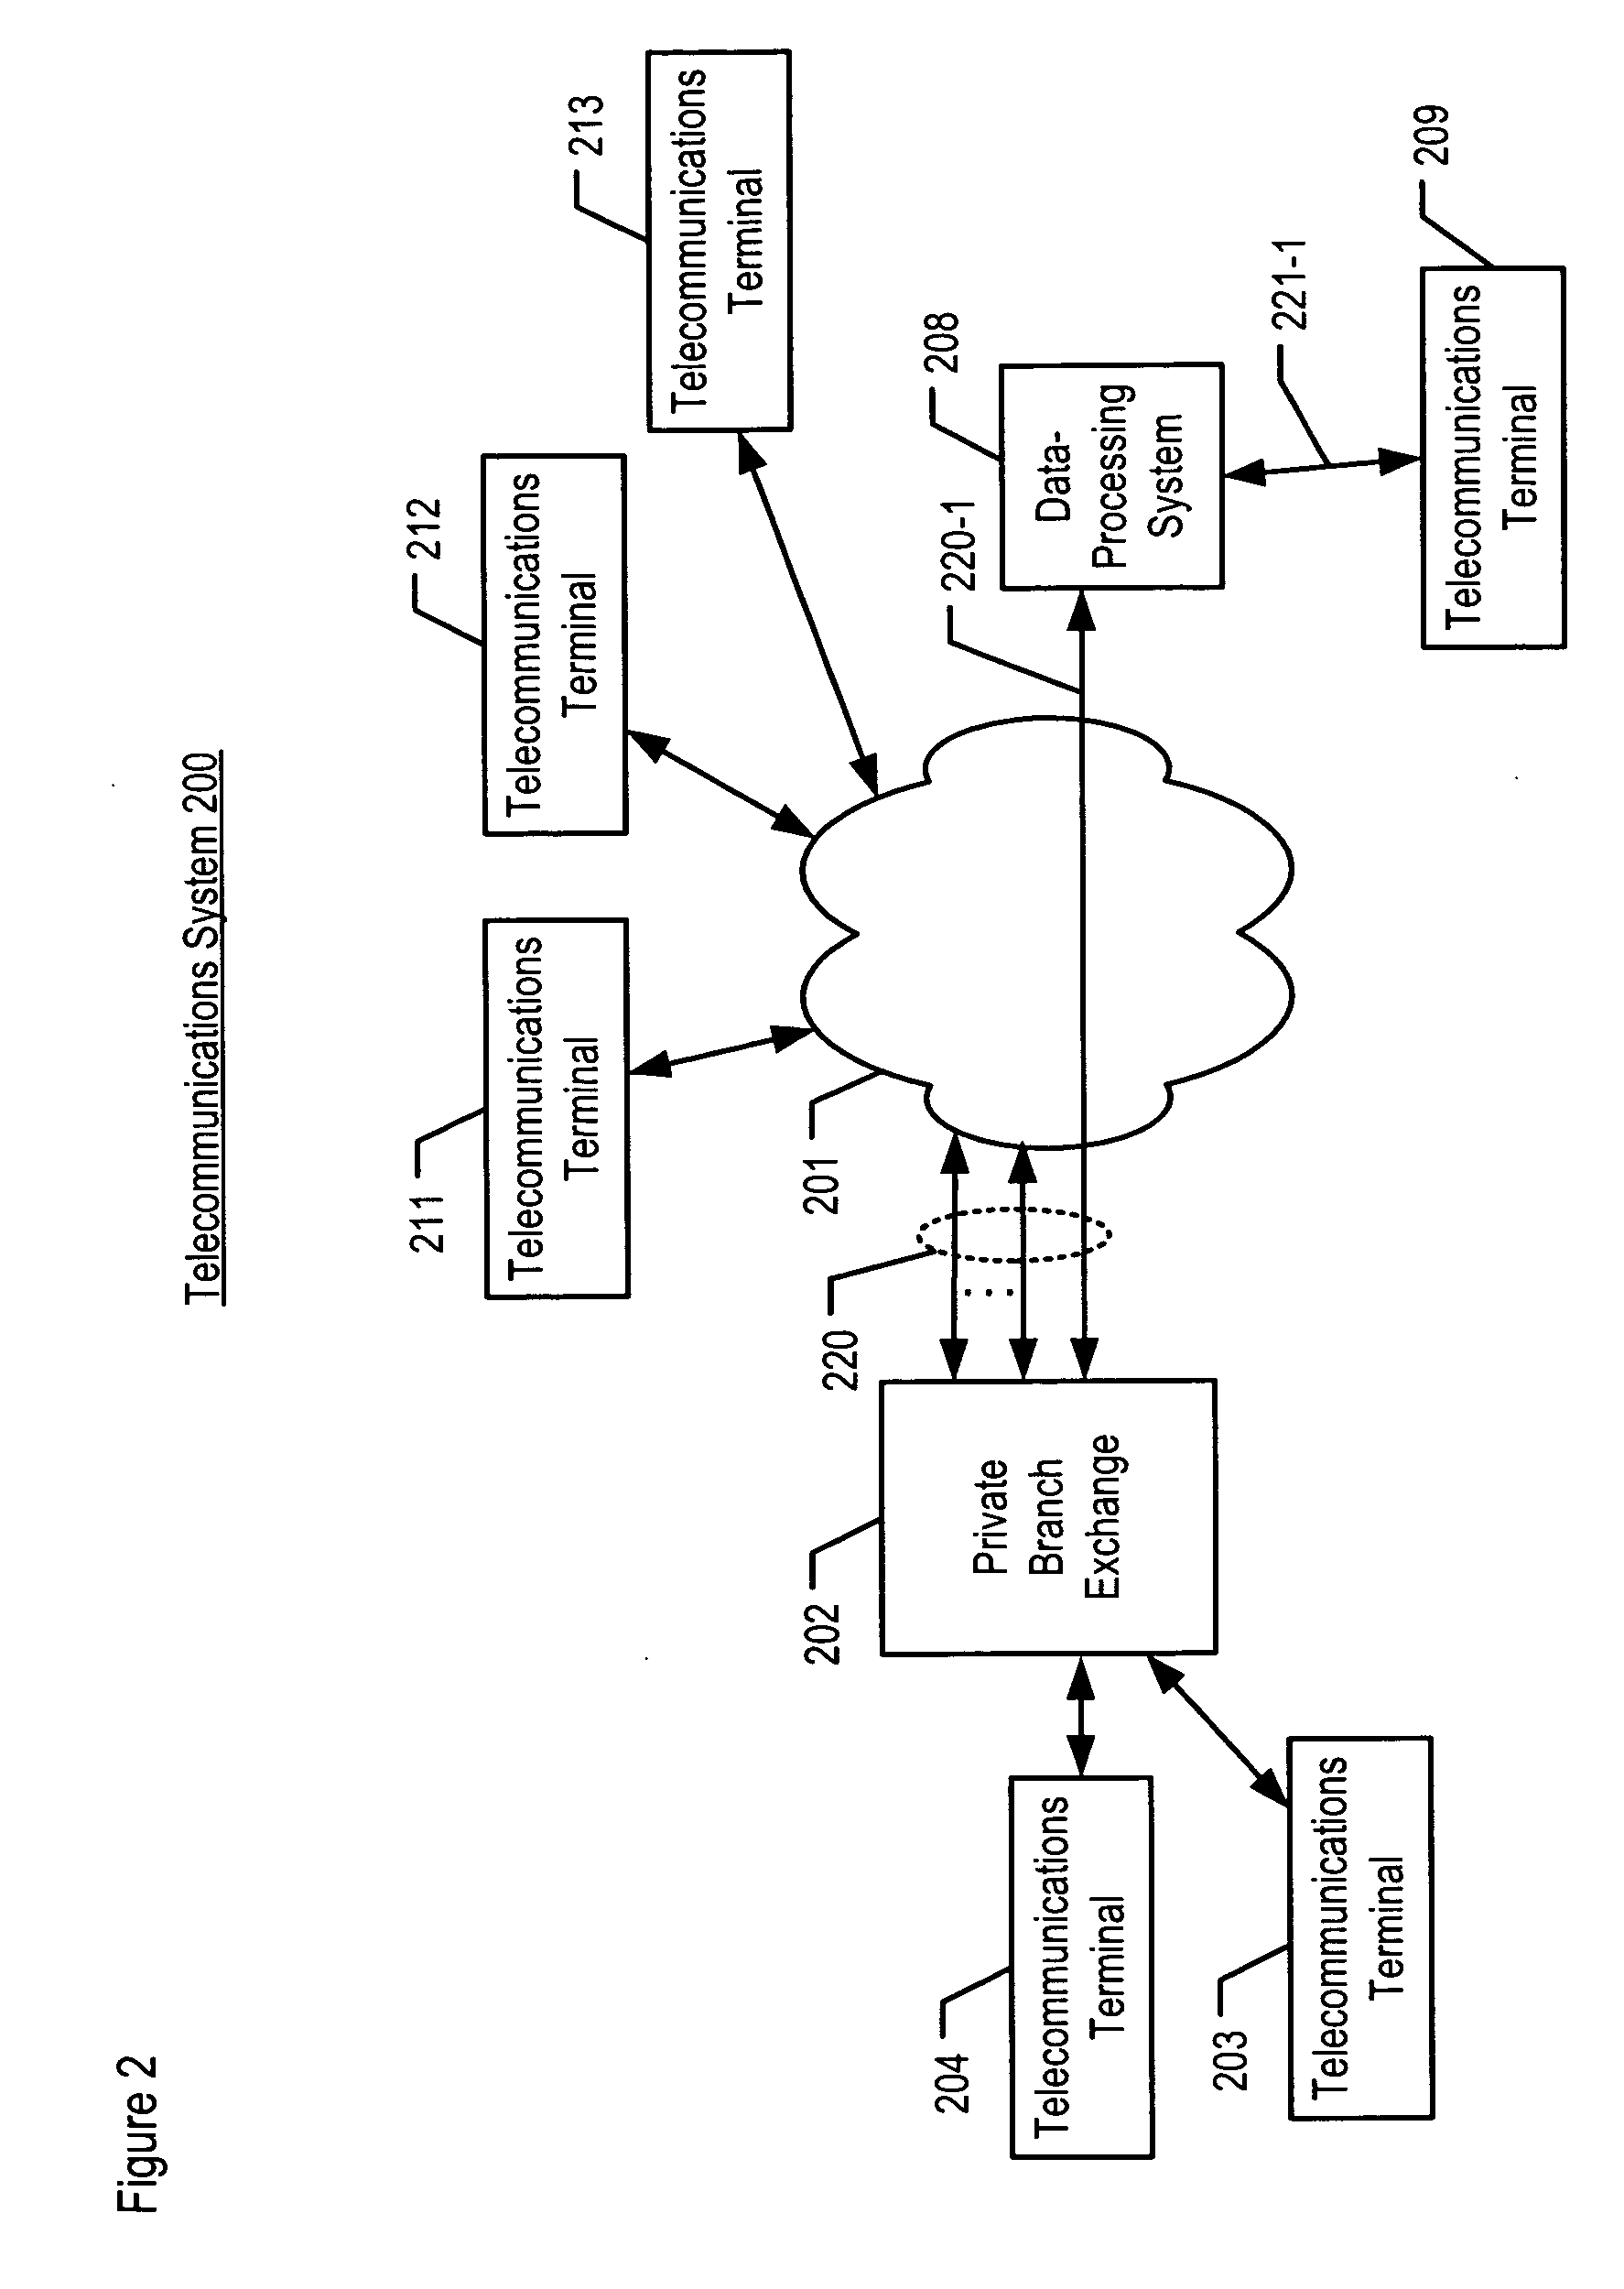 Managing held telephone calls at the call-forwarding system